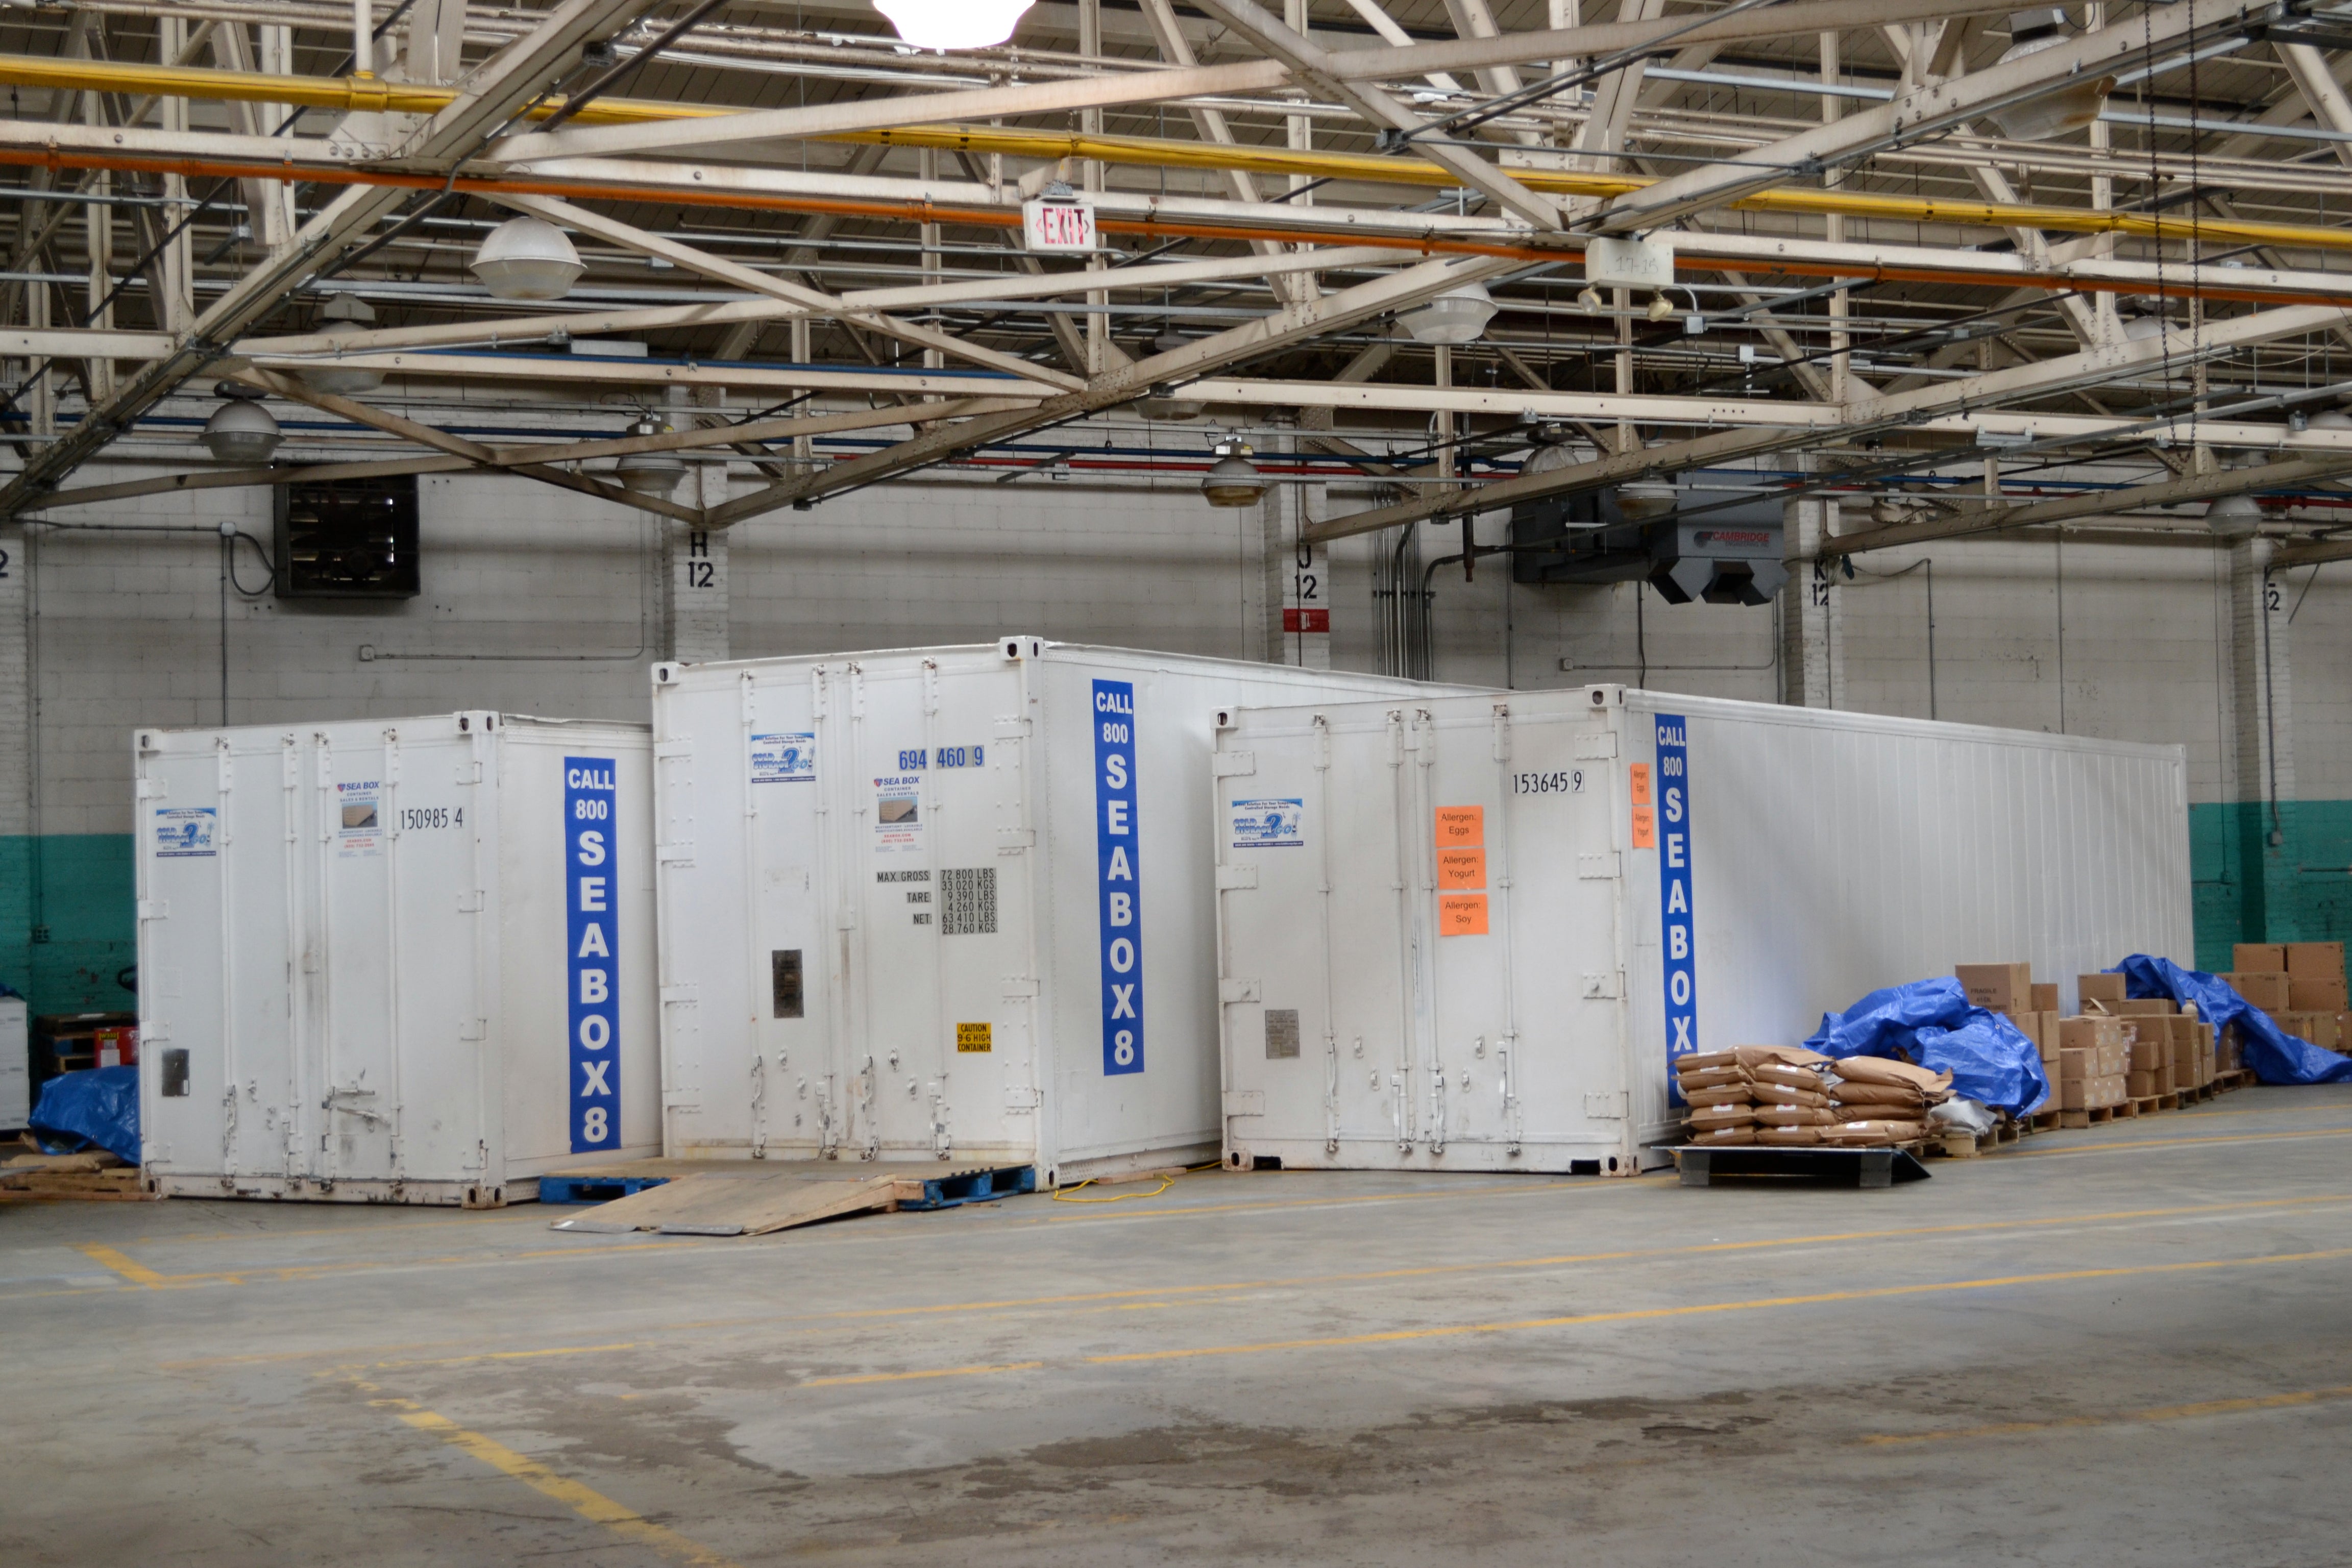 Common Market will build a 6,000 square foot cold storage system. In the meantime, it is using temporary cold storage units